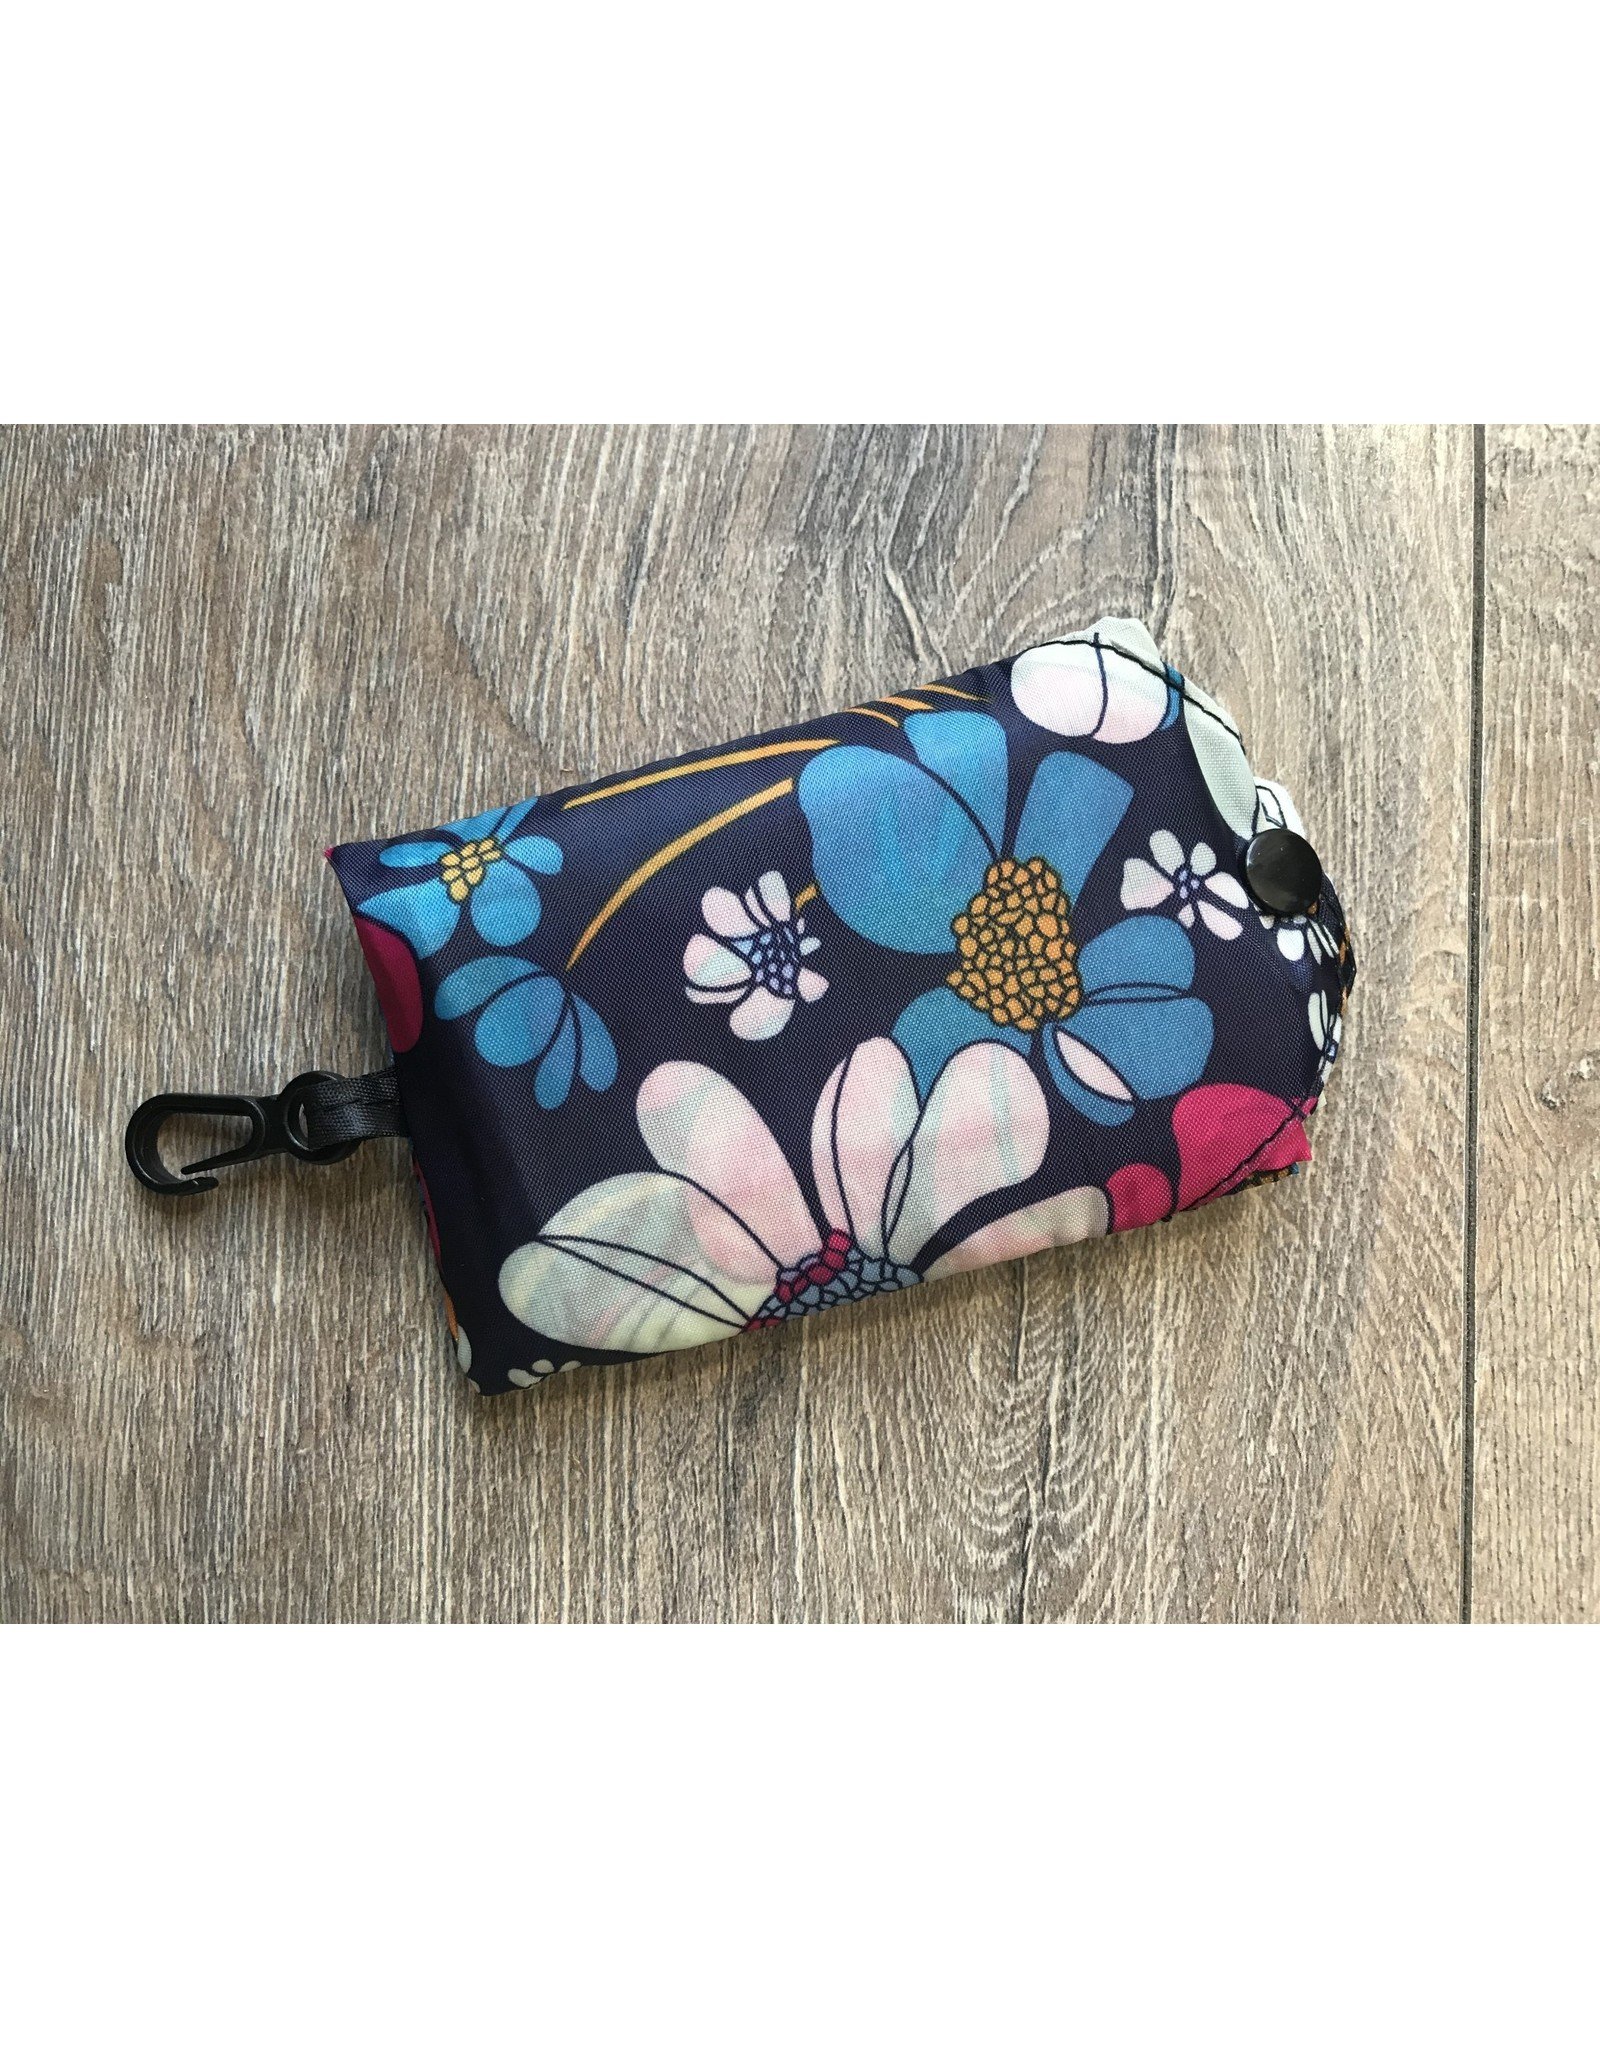 Chic Addition Eco bags (small) - multiple prints